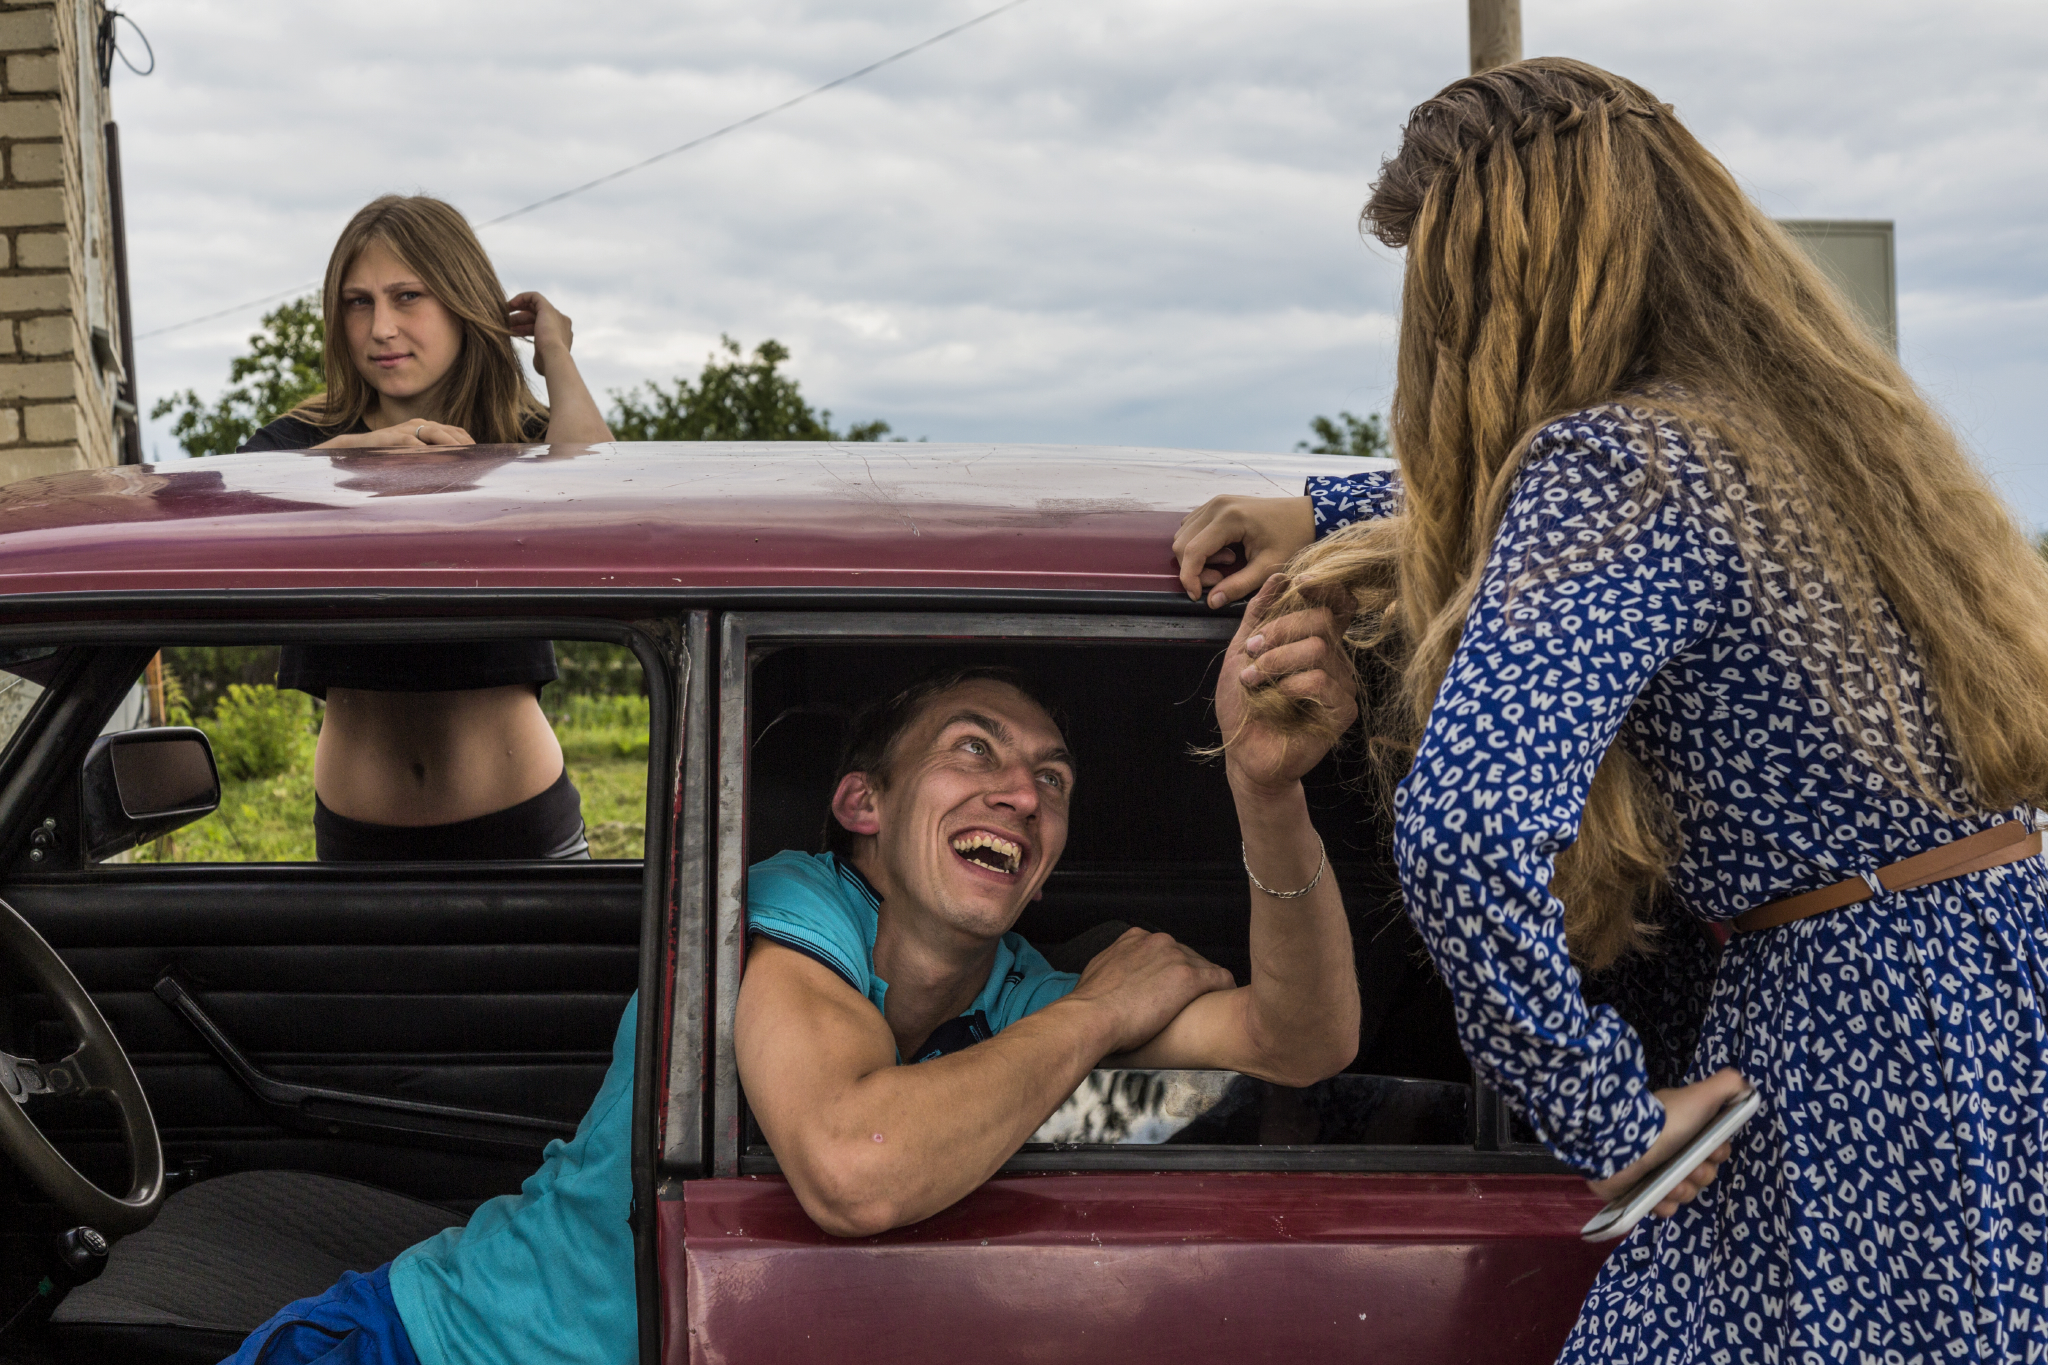  Before the "Day of the Village" celebration, young people in Nikolskoyedo do what young people do everywhere when entertainment is sparse: hang out and flirt. Until recent downturn, the century's oil-fueled economy expanded rapidly, and Russia's you